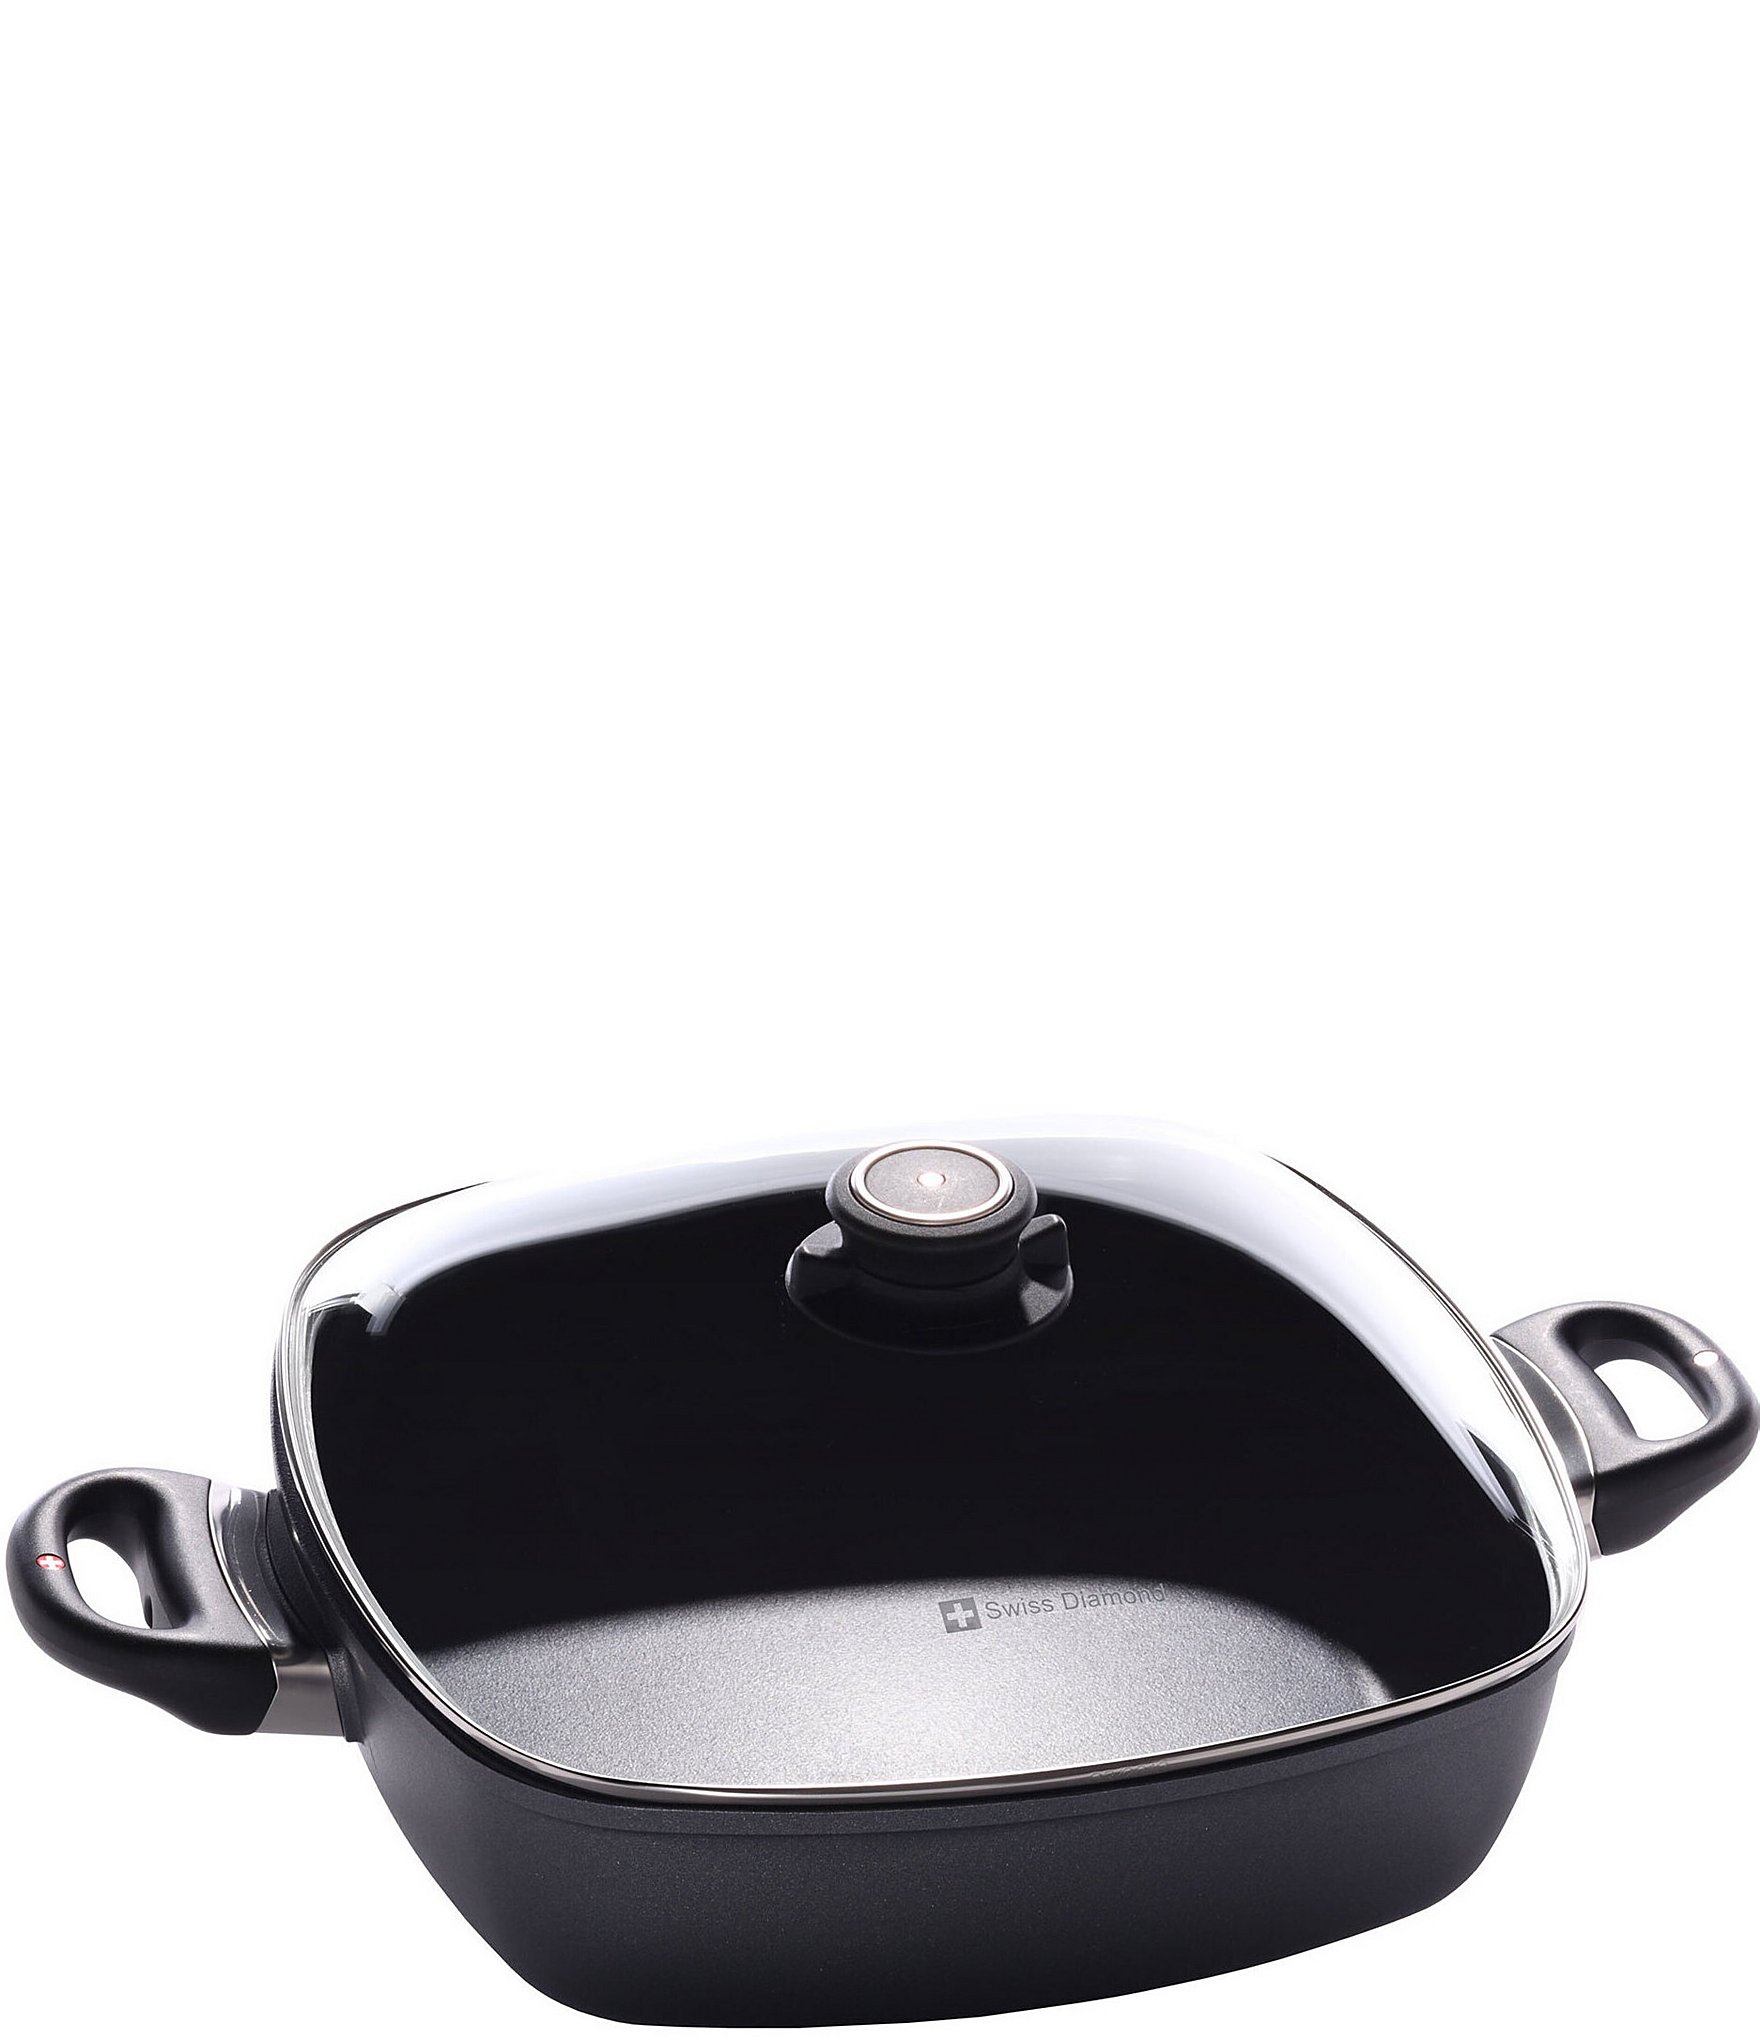 Swiss Diamond HD Nonstick Cookware Review - Consumer Reports